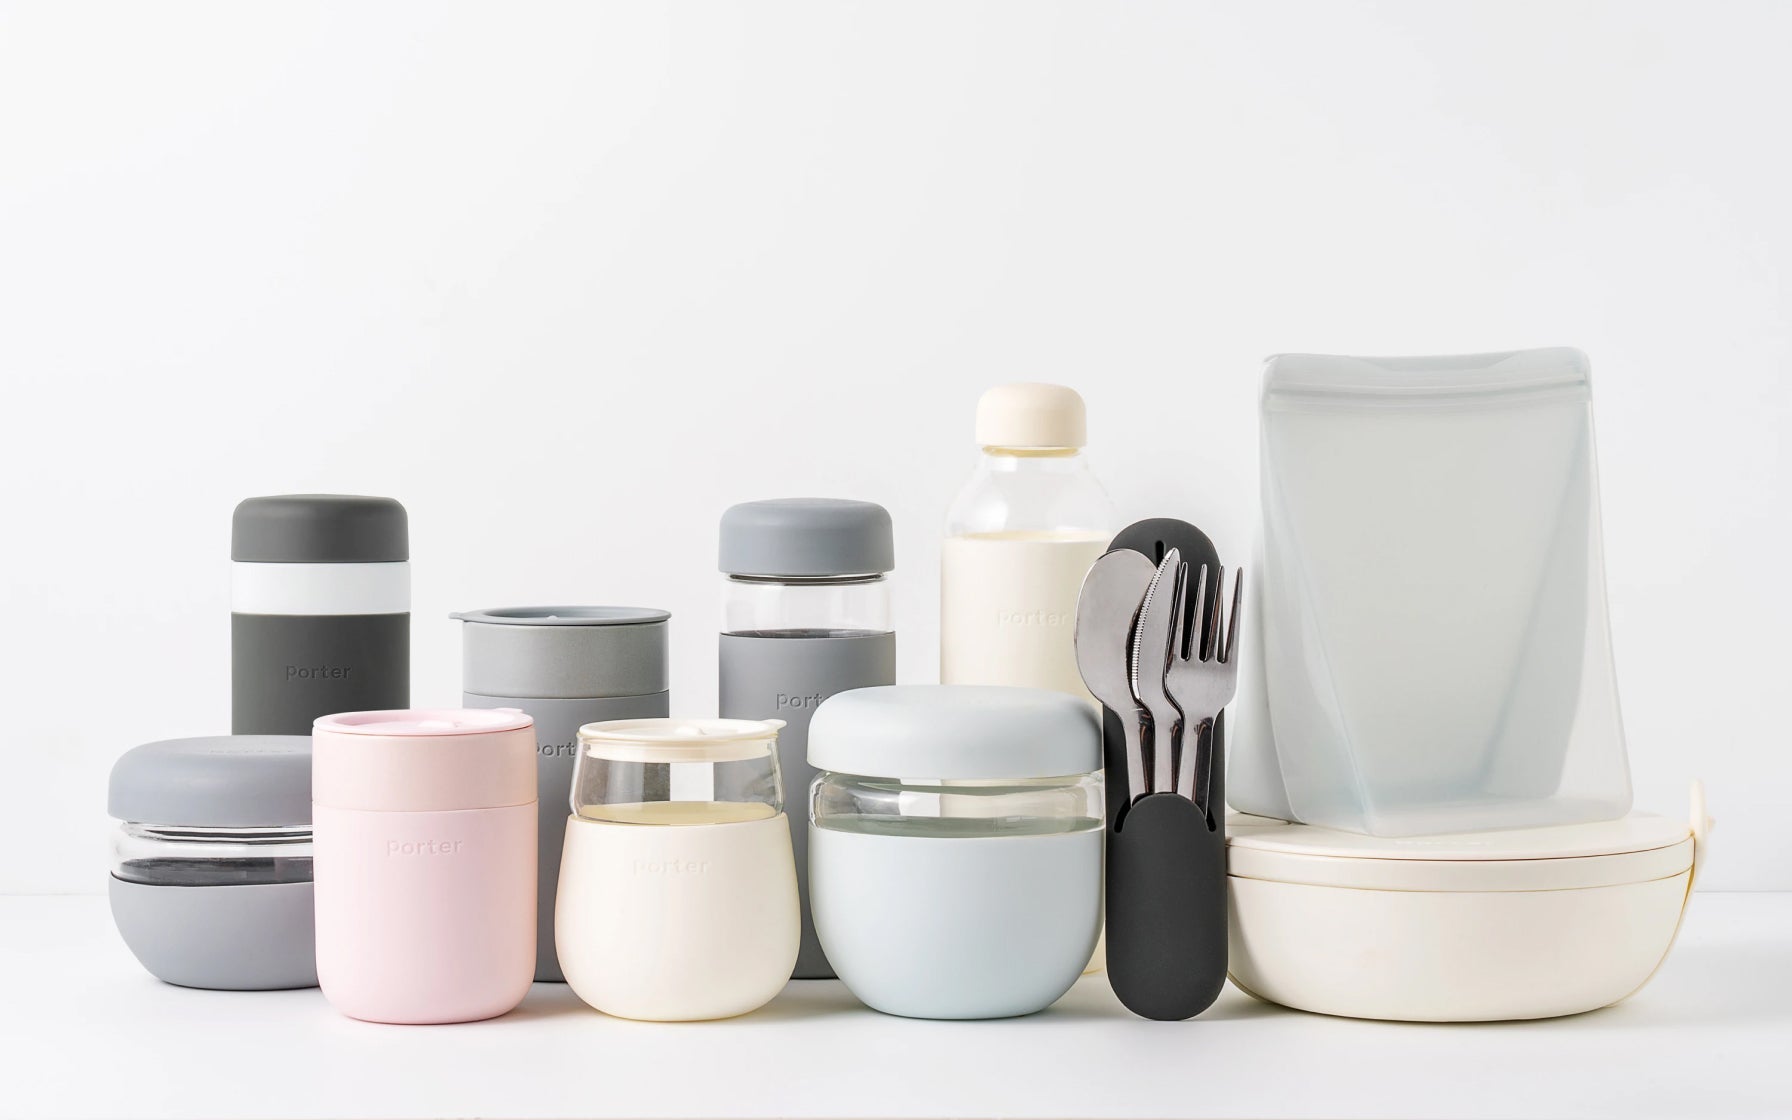 https://cdn.shopify.com/s/files/1/0507/8954/8229/articles/wp-porter-bundle-review-a-charming-sustainable-alternative-to-plasticware-894568.jpg?v=1674744519